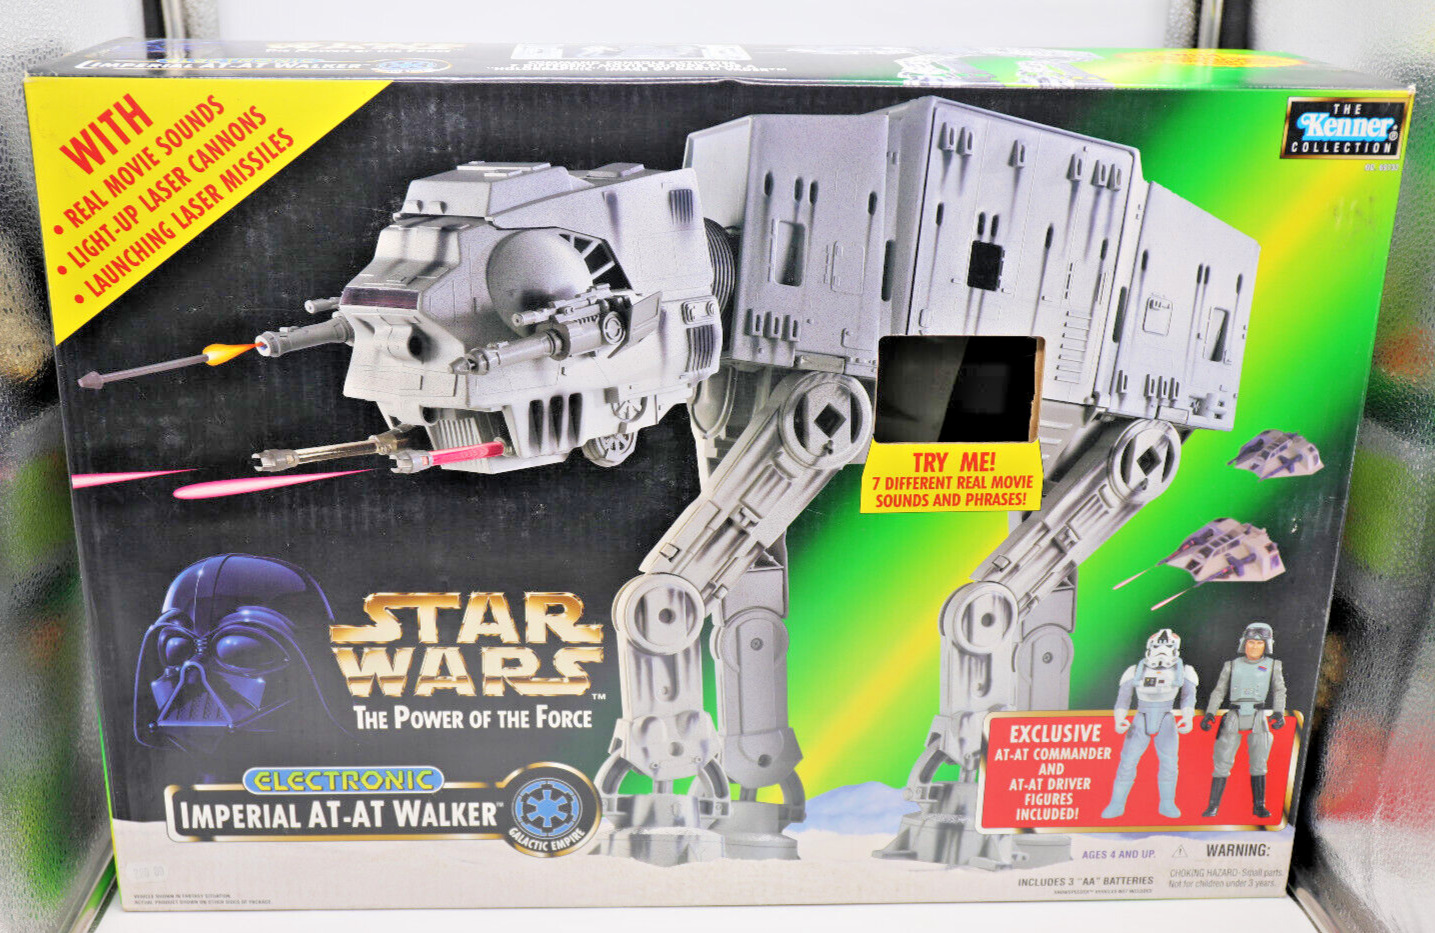 STAR WARS IMPERIAL AT-AT WALKER electronic (Kenner) New (TB-TT)